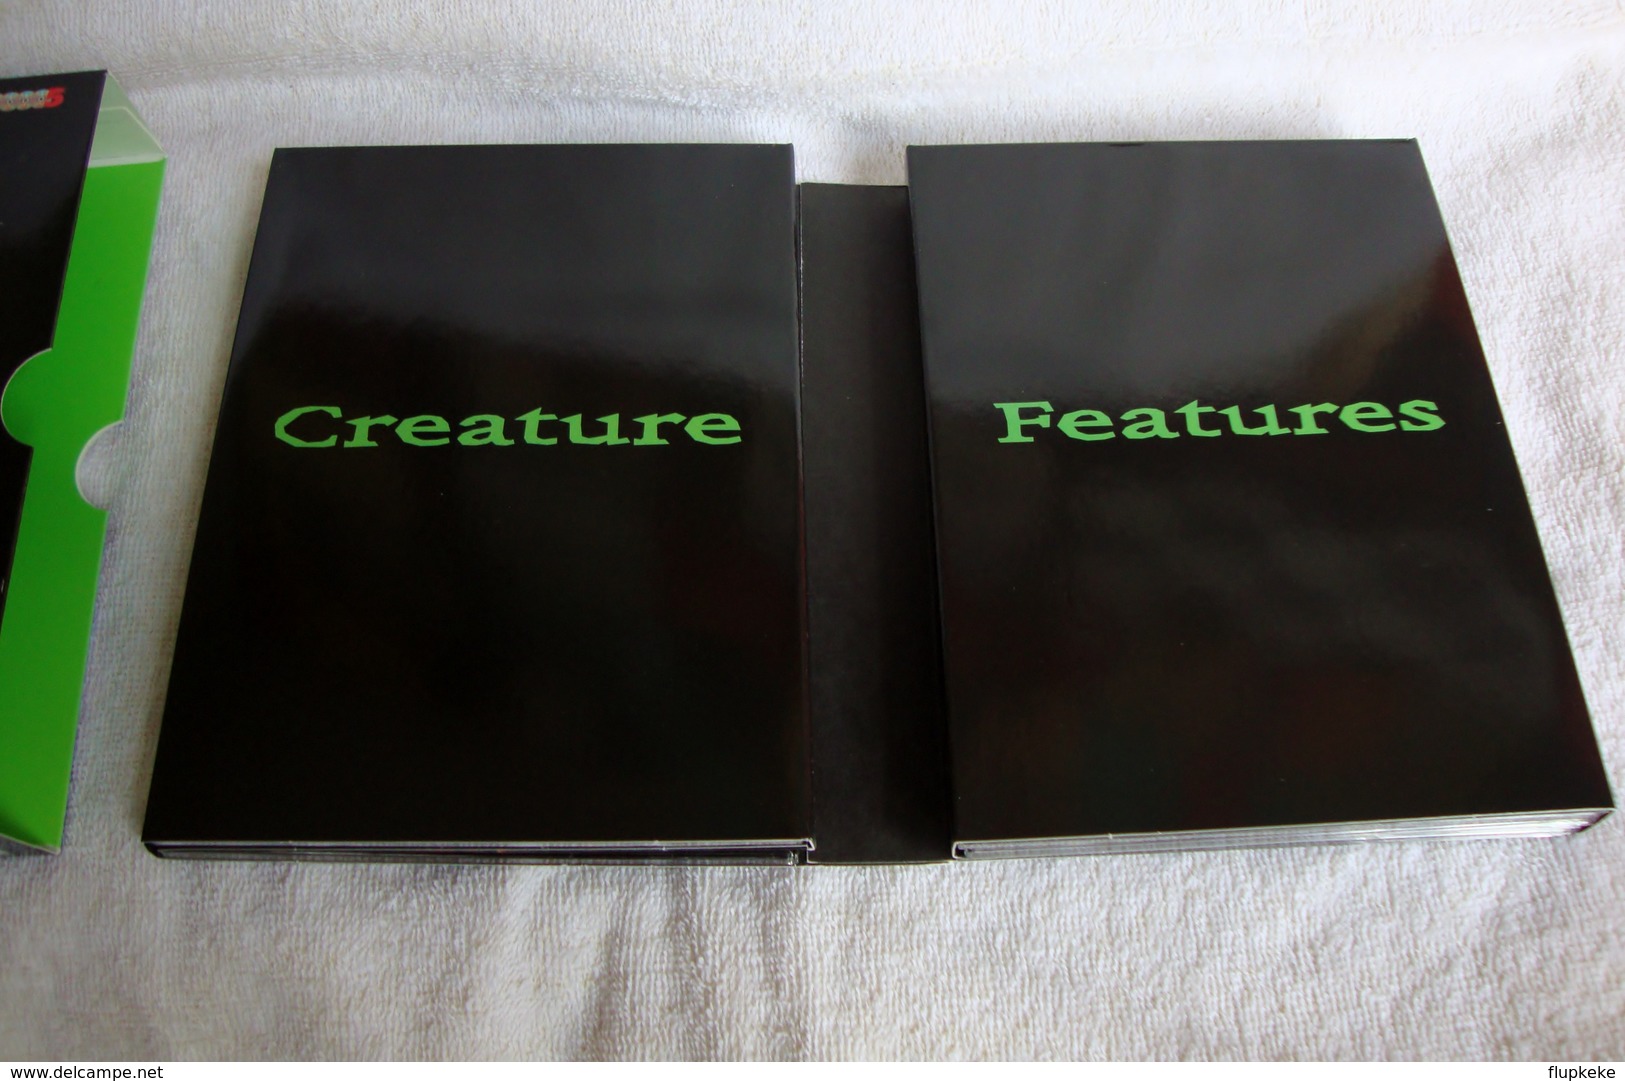 Dvd Zone 2 Creature Features She Creature The Day The World Ended Earth Vs. Spider Teenage Caveman How To Make A Monster - Fantascienza E Fanstasy